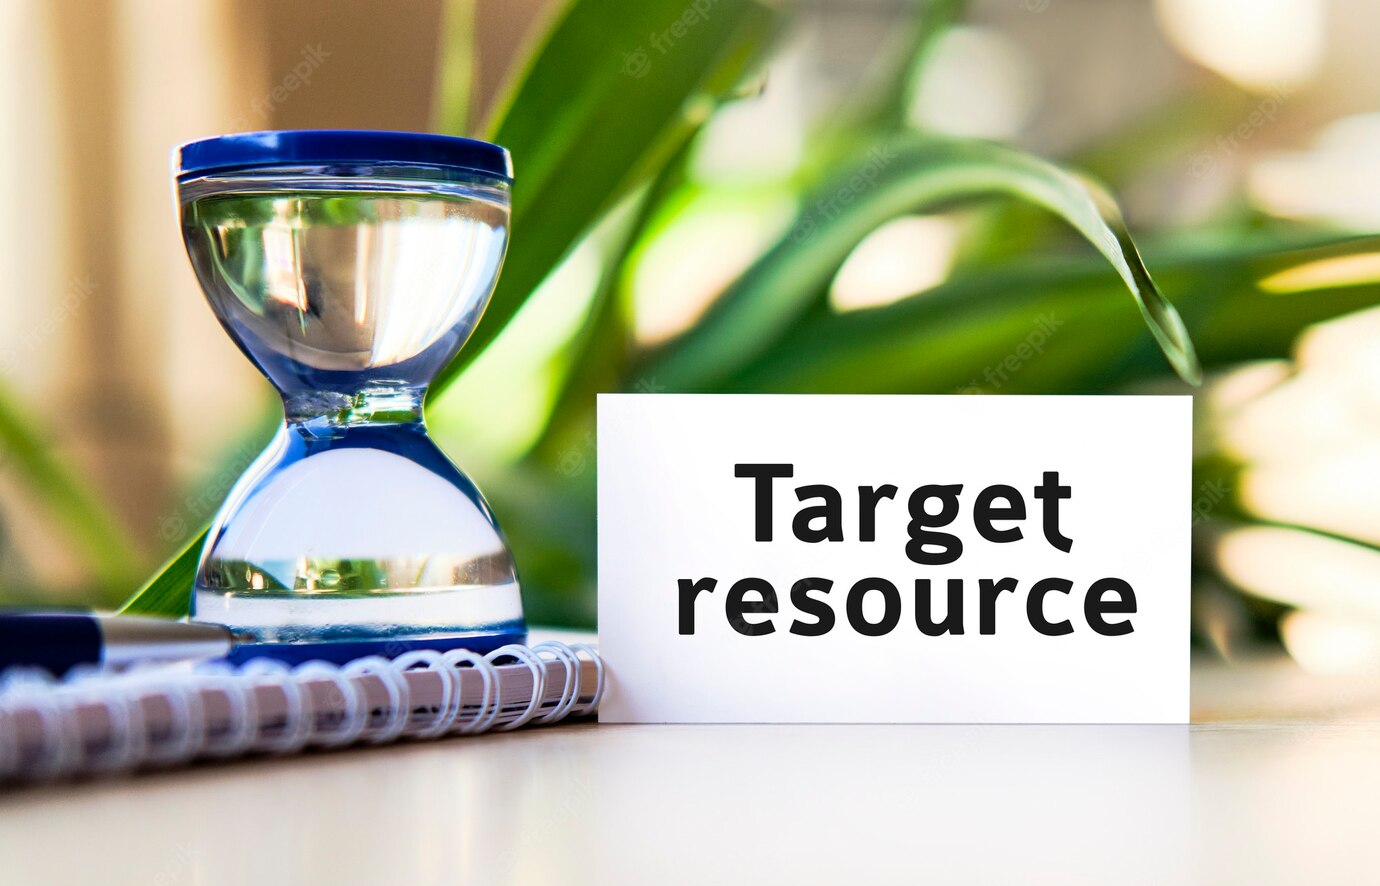 target-resource-text-white-notebook-hourglass-clock